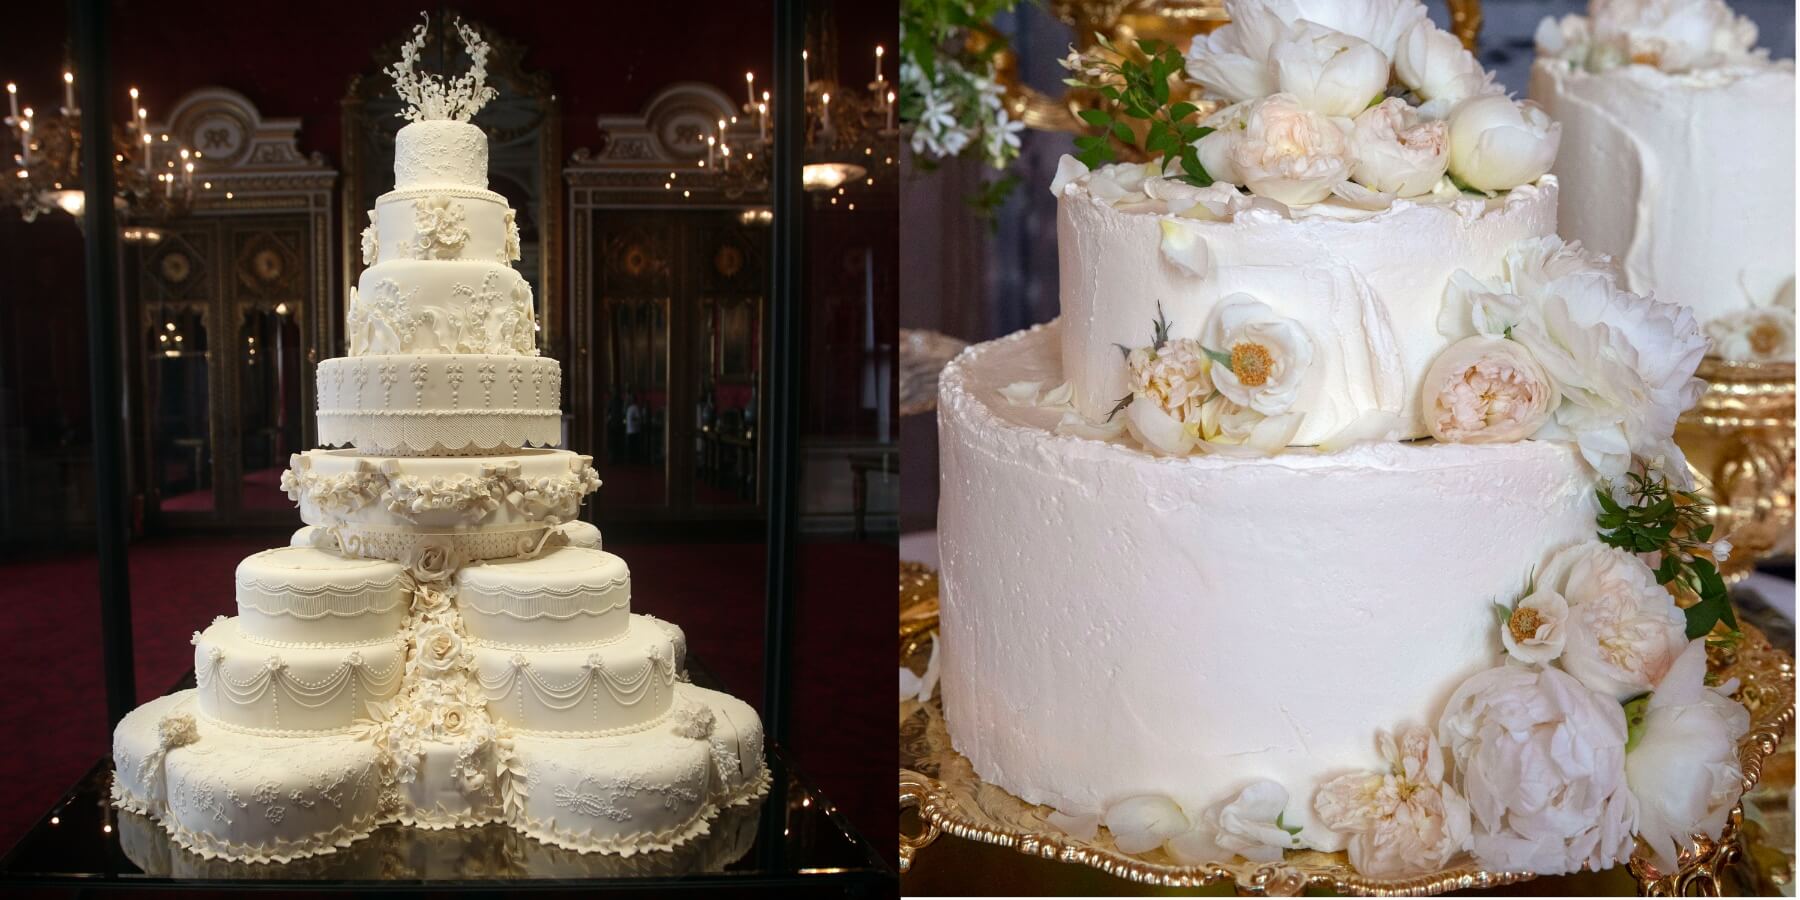 Prince William and Kate Middleton's wedding cake (L) and Prince Harry and Meghan Markle's cake (R).